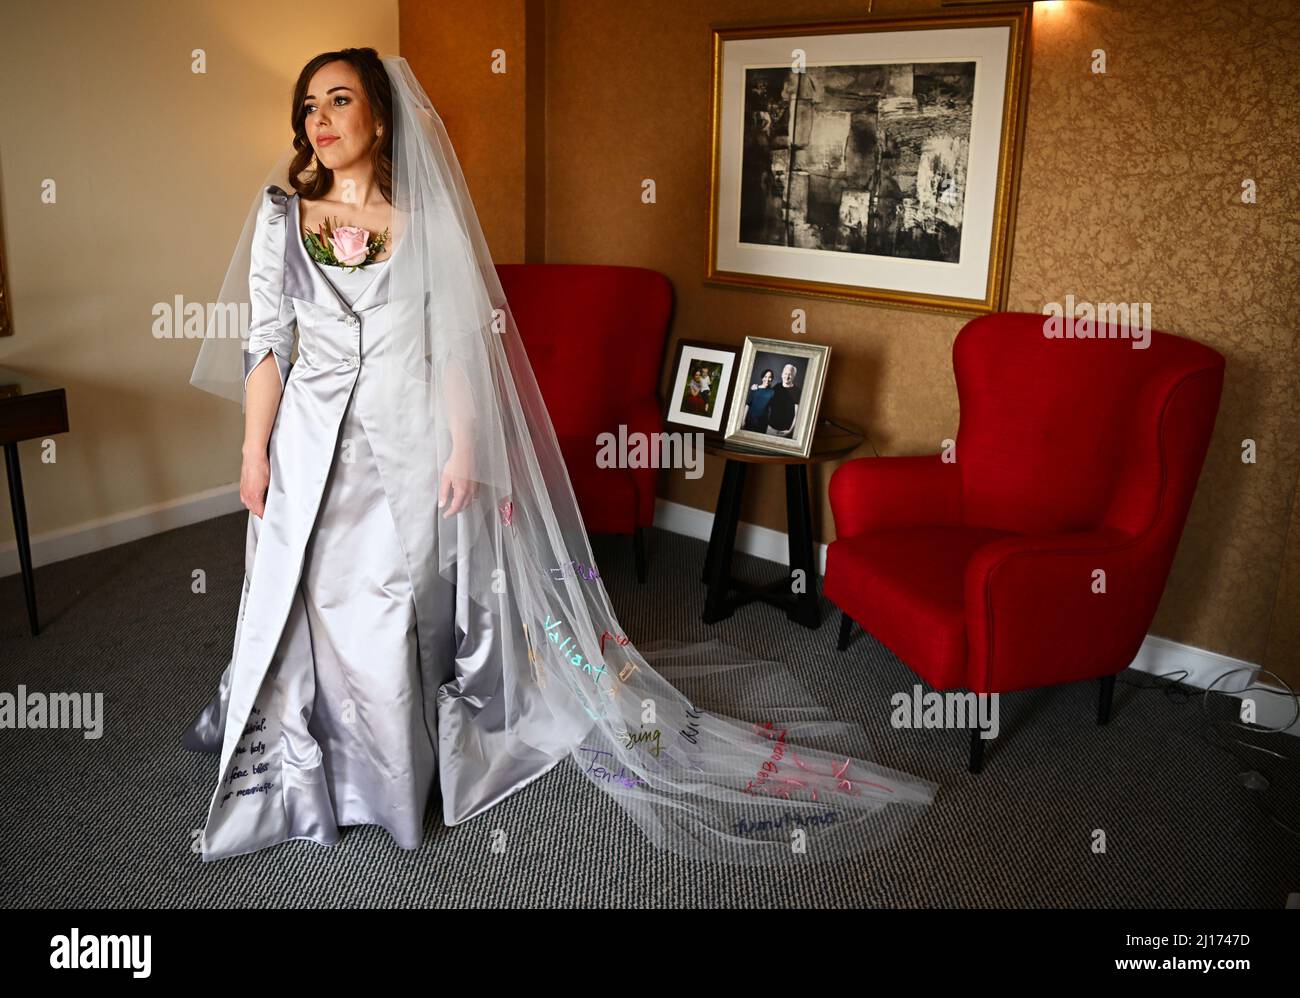 Stella Moris, the partner of Wikileaks founder Julian Assange, is photographed in her Vivienne Westwood designed wedding dress before driving to Belmarsh Prison where she is due to marry Julian Assange, at a hotel in London, Britain March 23, 2022.   REUTERS/Dylan Martinez/Pool Stock Photo